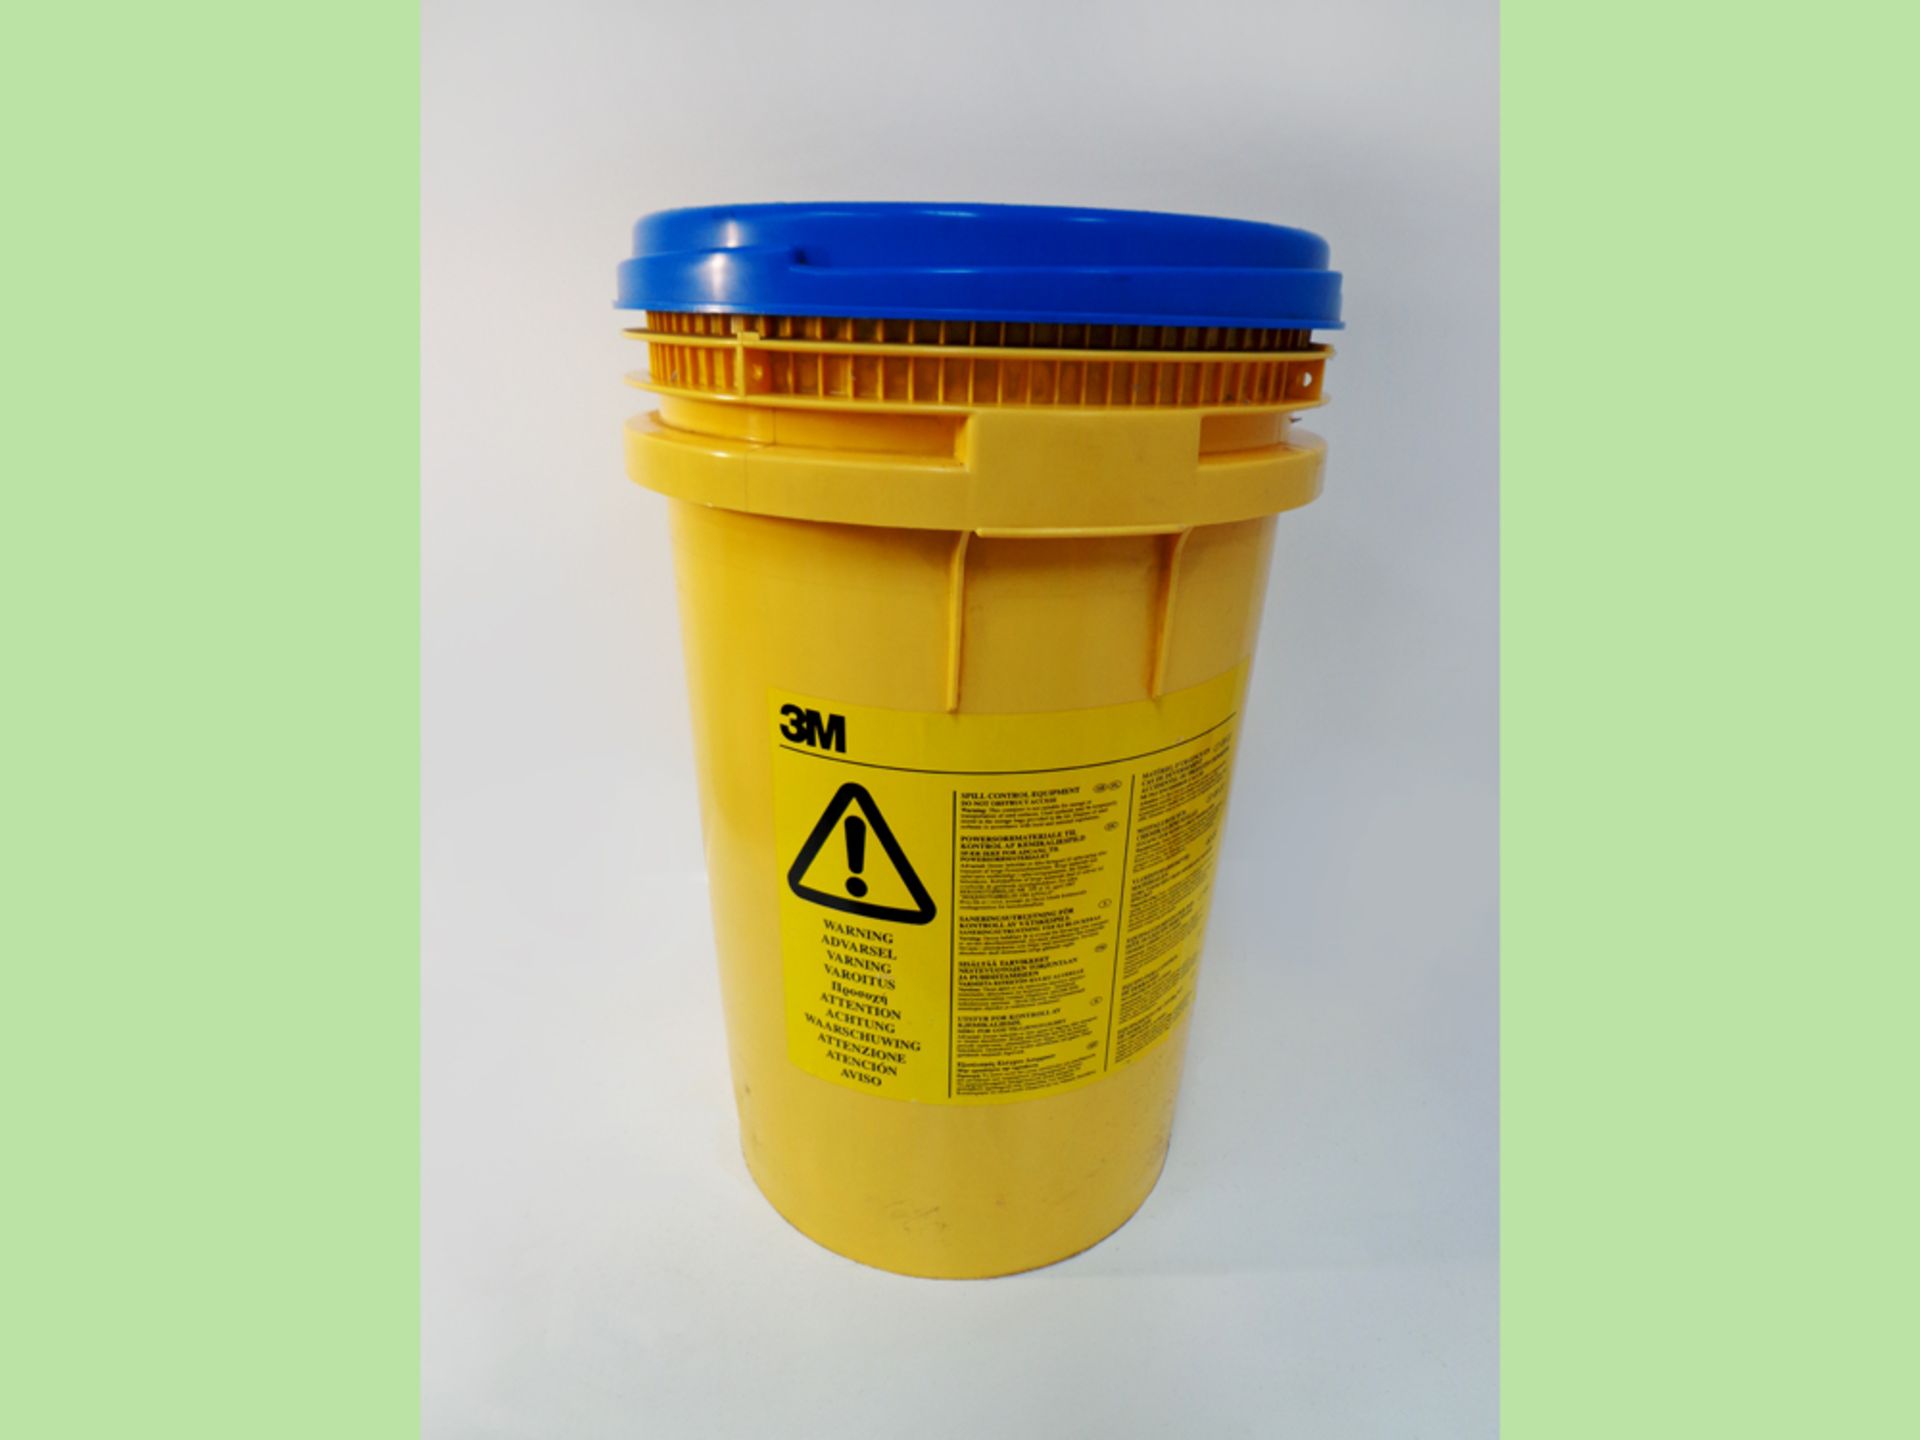 3M SK 26 Chemical Spill Control Kit for Absorption of Hazardous Liquids. - Image 2 of 8